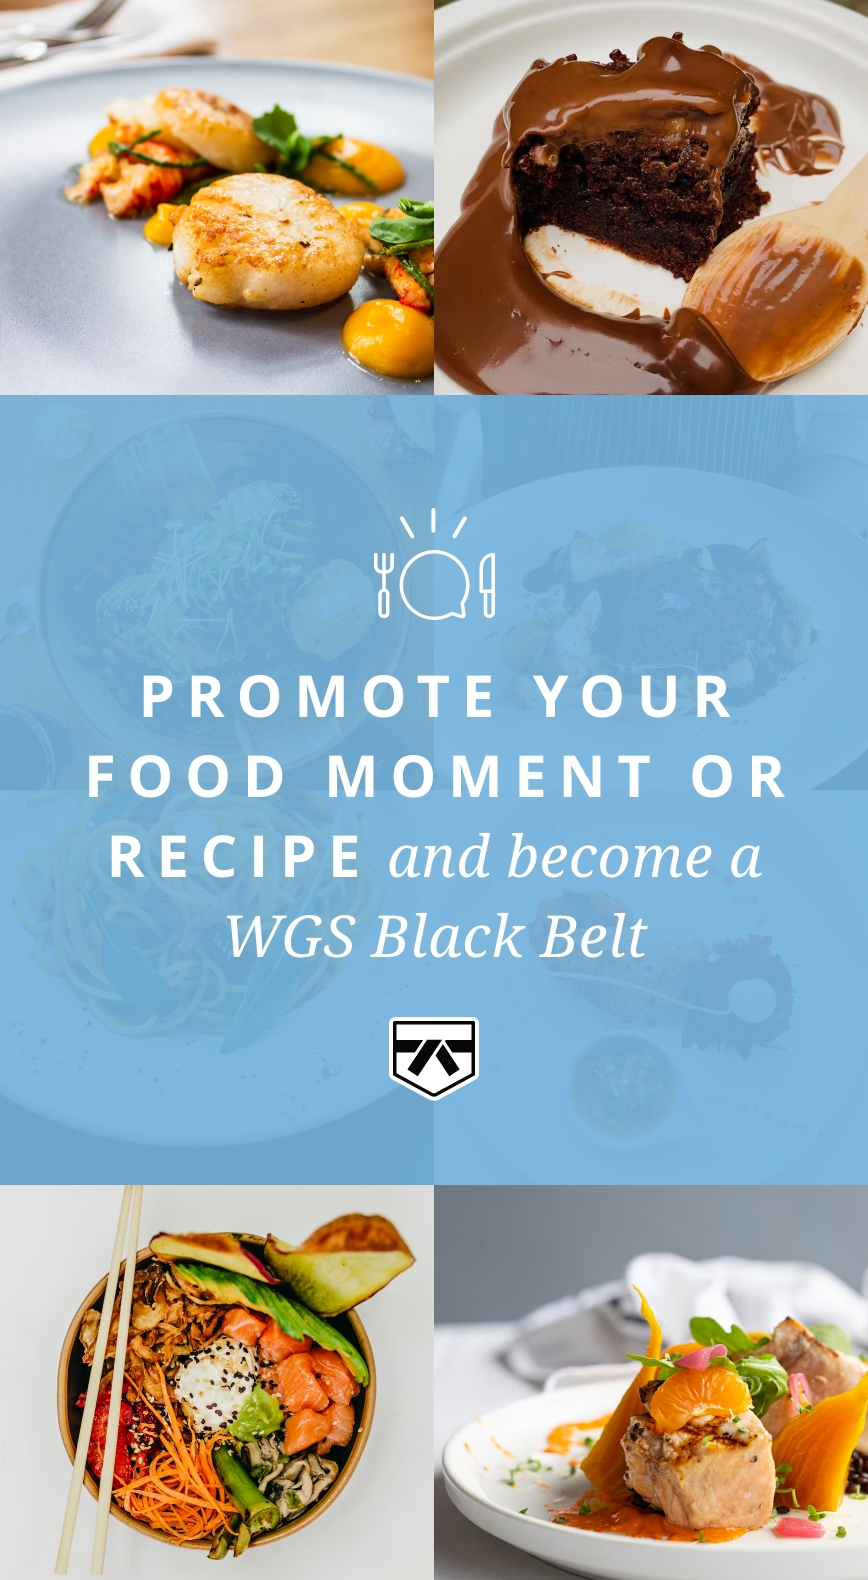 Promote your food moment or recipe and become a WGS Black Belt